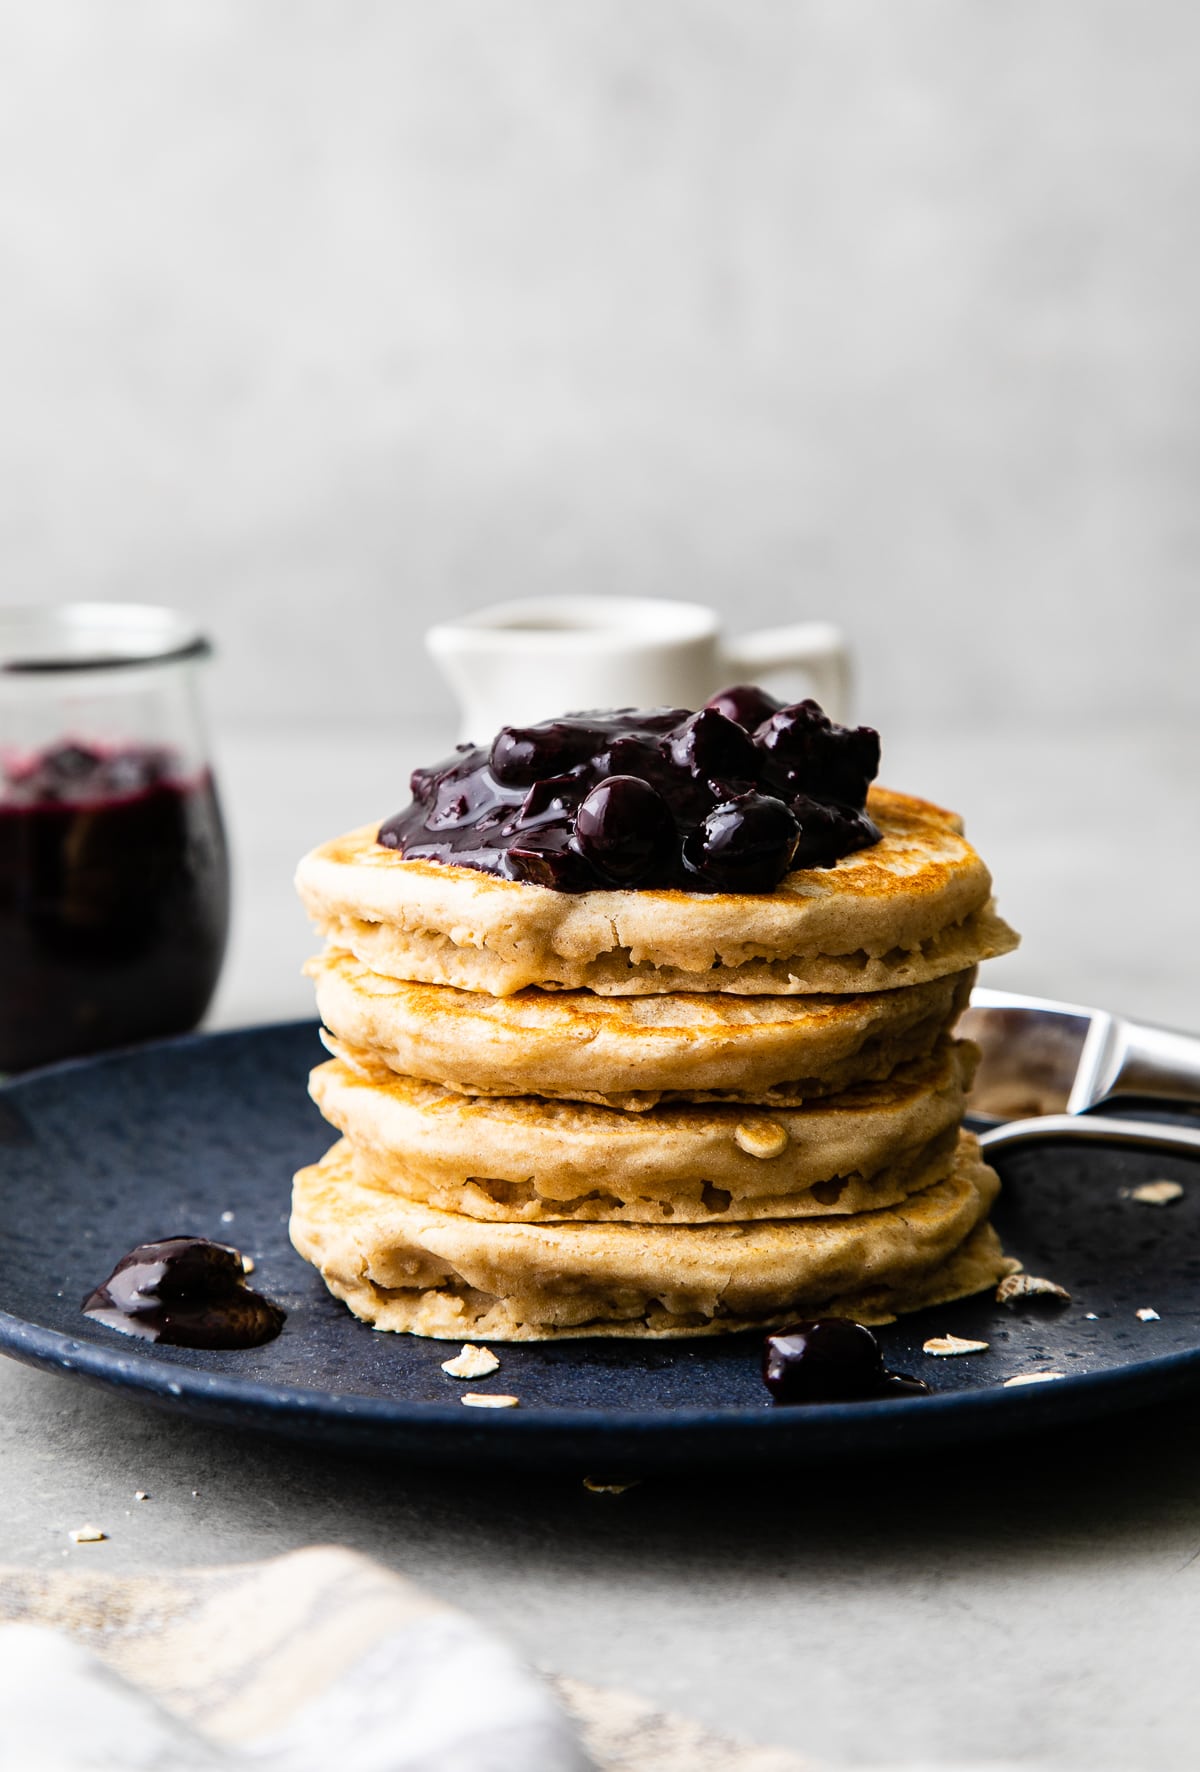 head on view stack of oatmeal pancakes topped with blueberry compote on a plate with items surrounding.